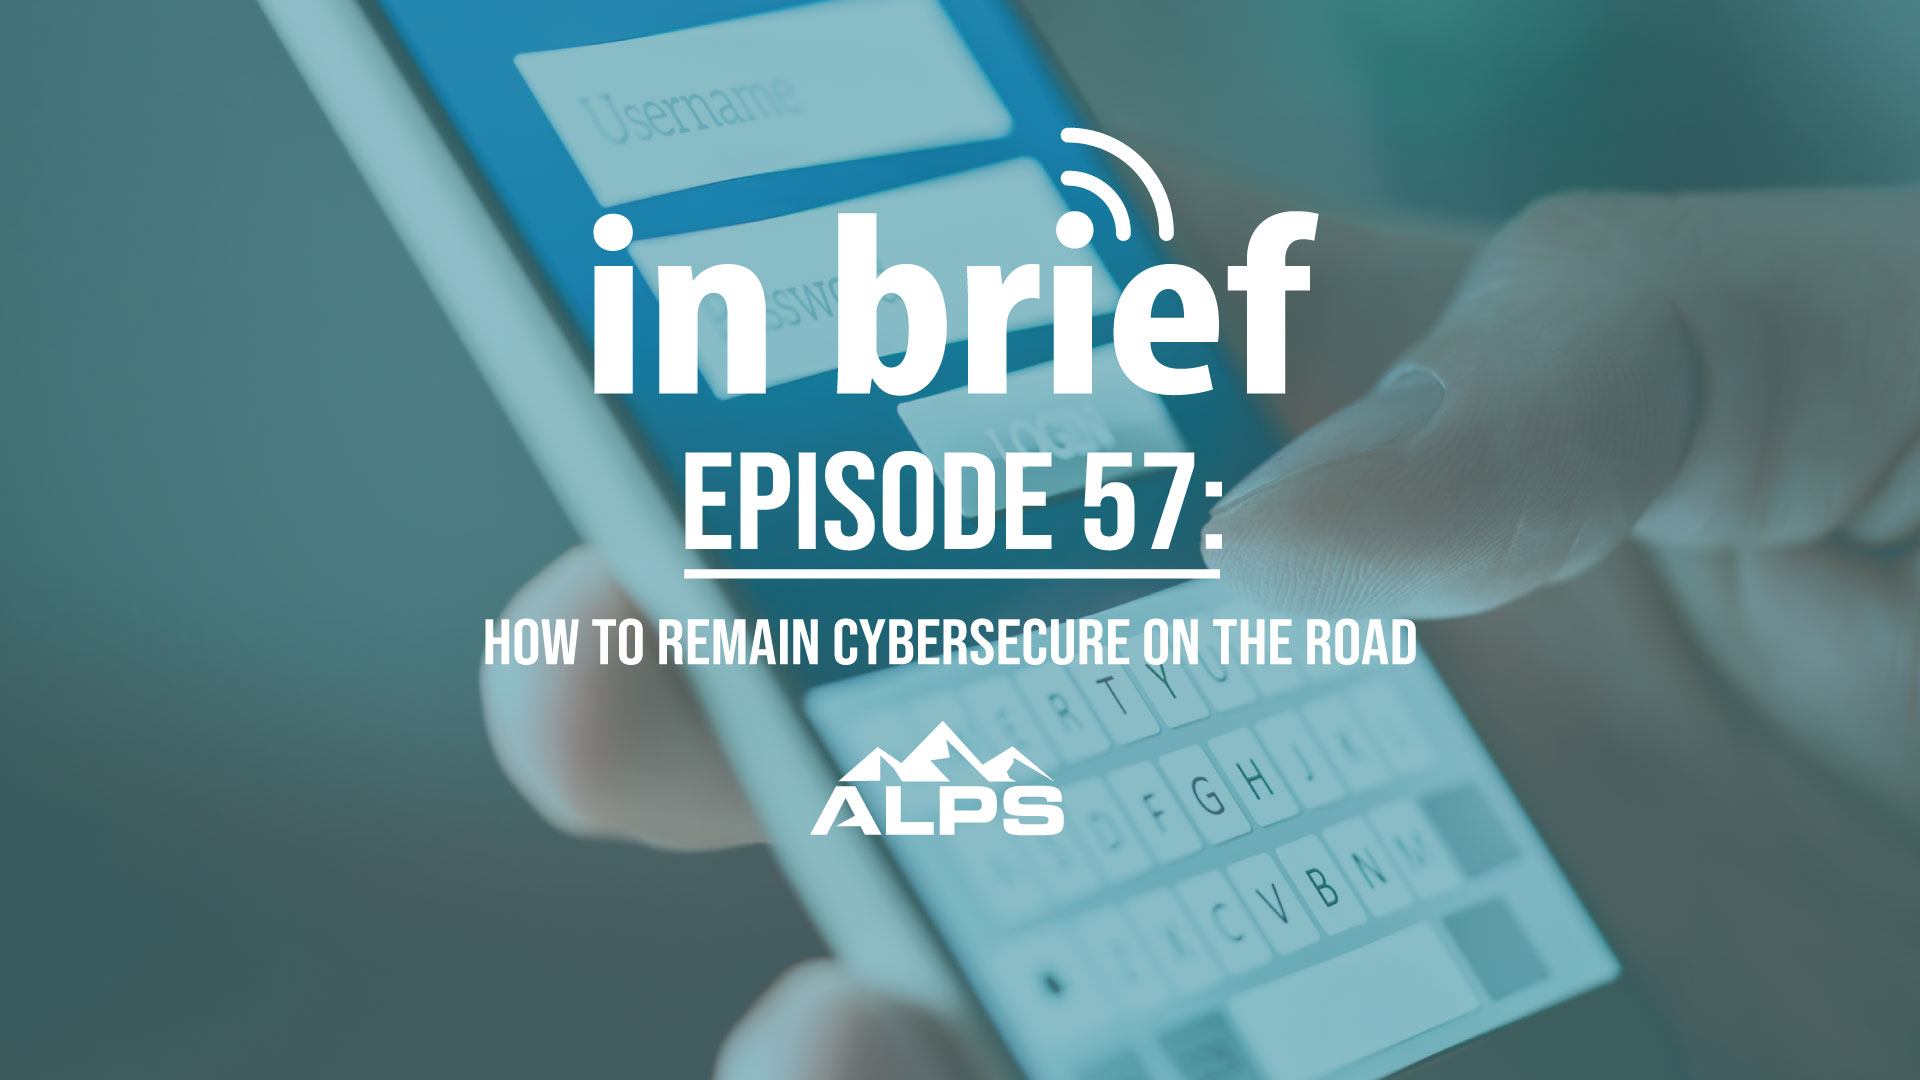 ALPS In Brief – Episode 57: How to Remain Cybersecure On the Road